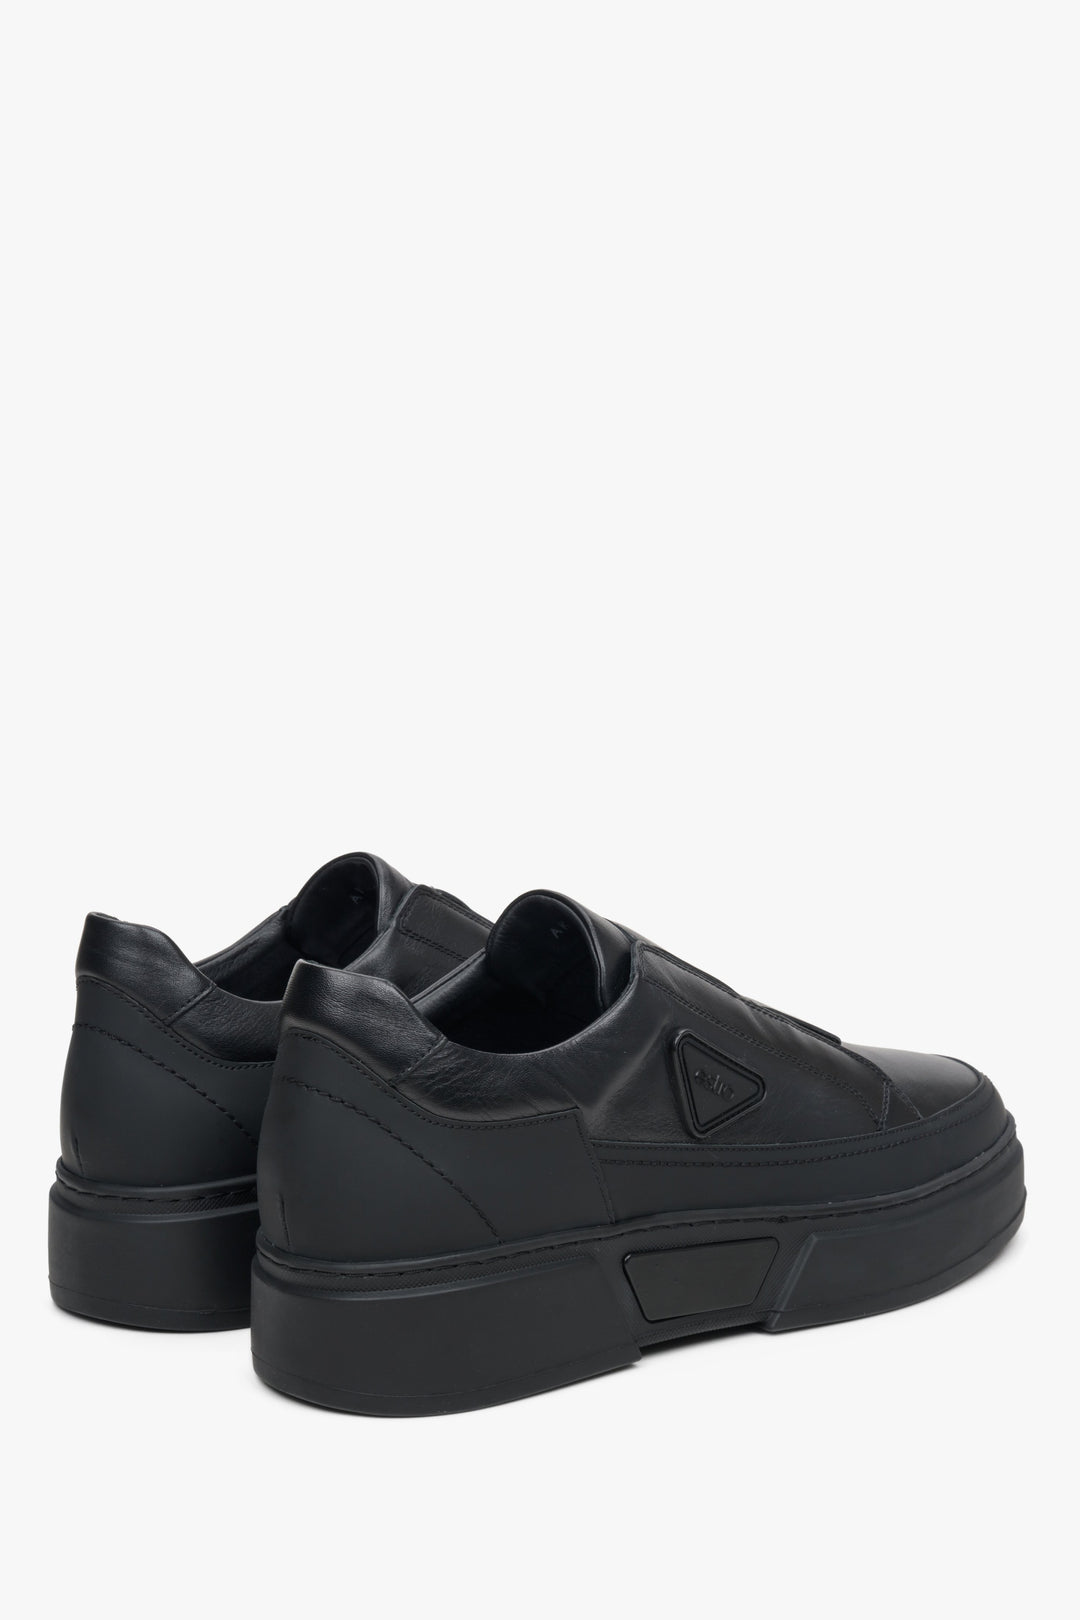 Men's black slip-on sneakers by Estro made of natural leather - close-up on the side line and heel.